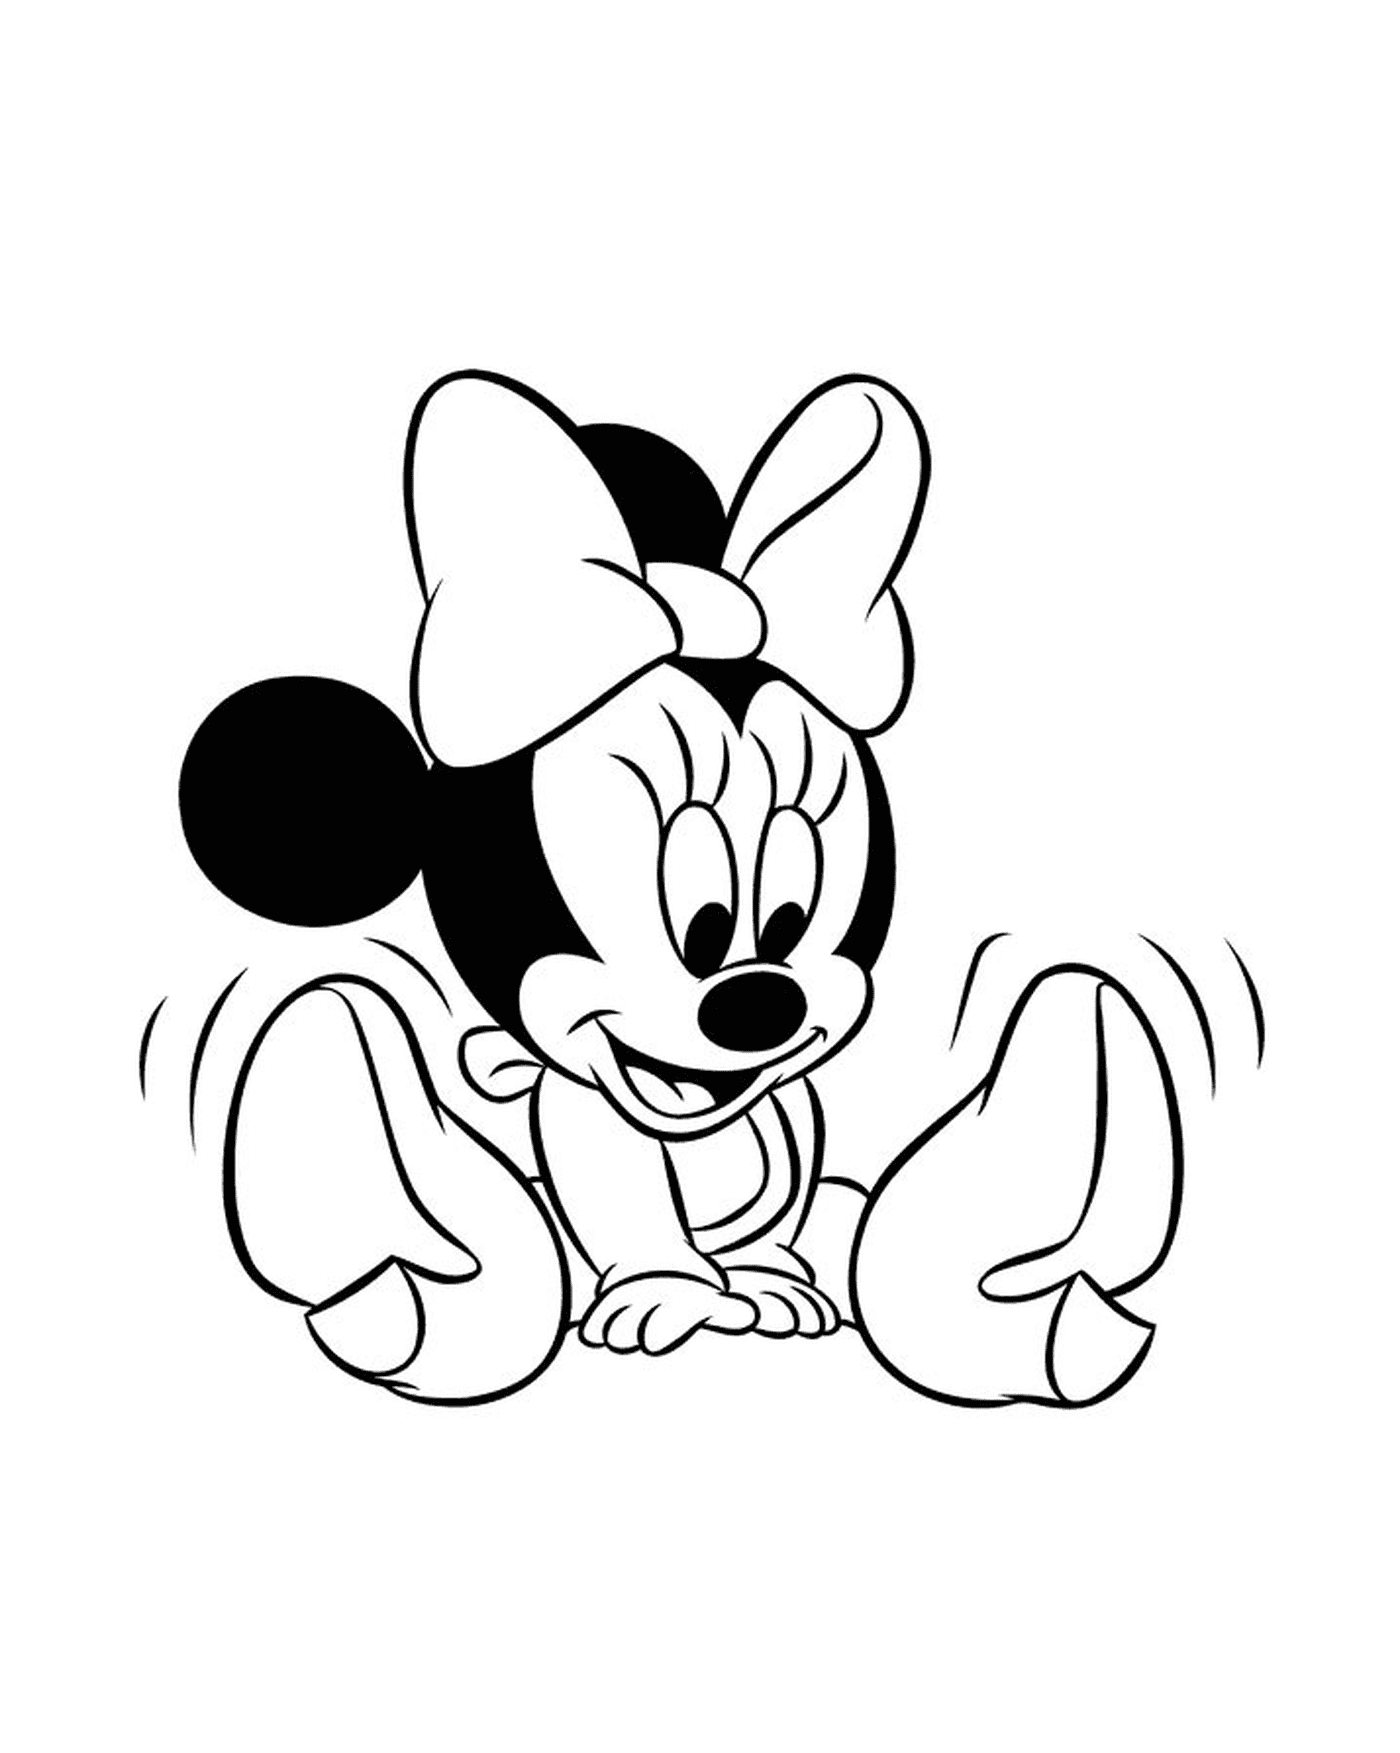  Minnie Mouse baby sitting on the floor, legs crossed 